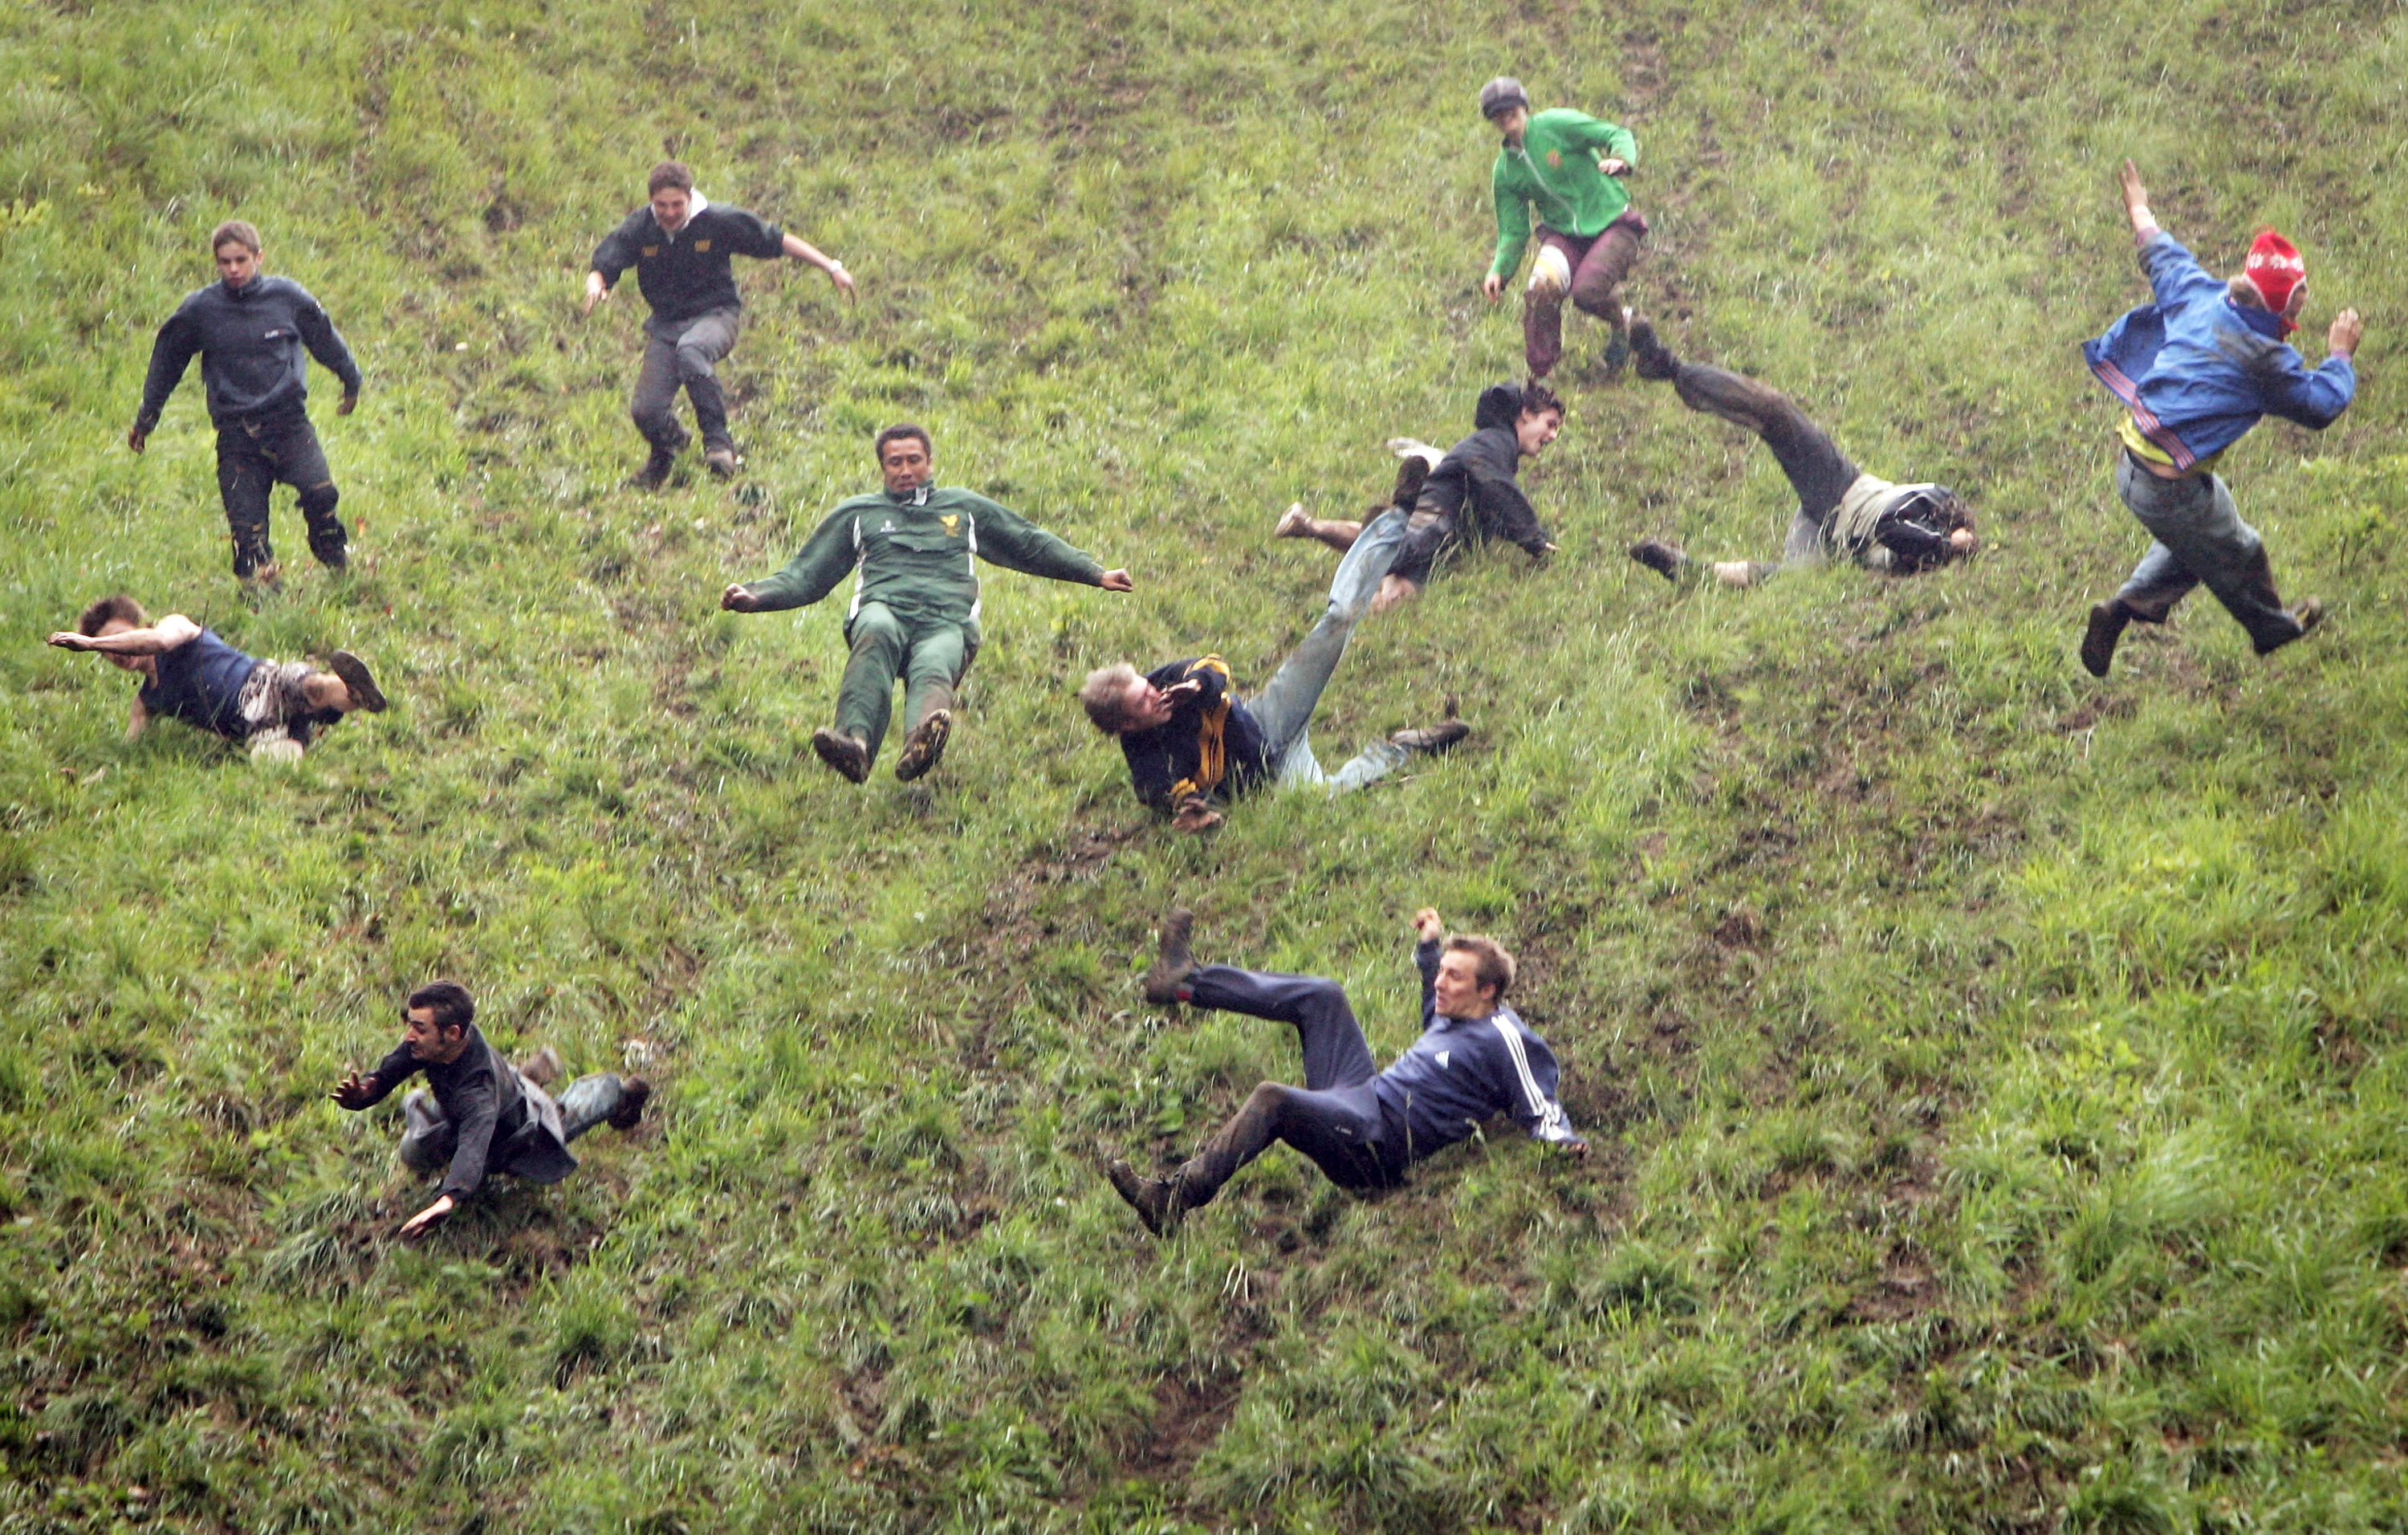 The 2018 UK Cheese Rolling Contest Was A Complete Mess With Flying